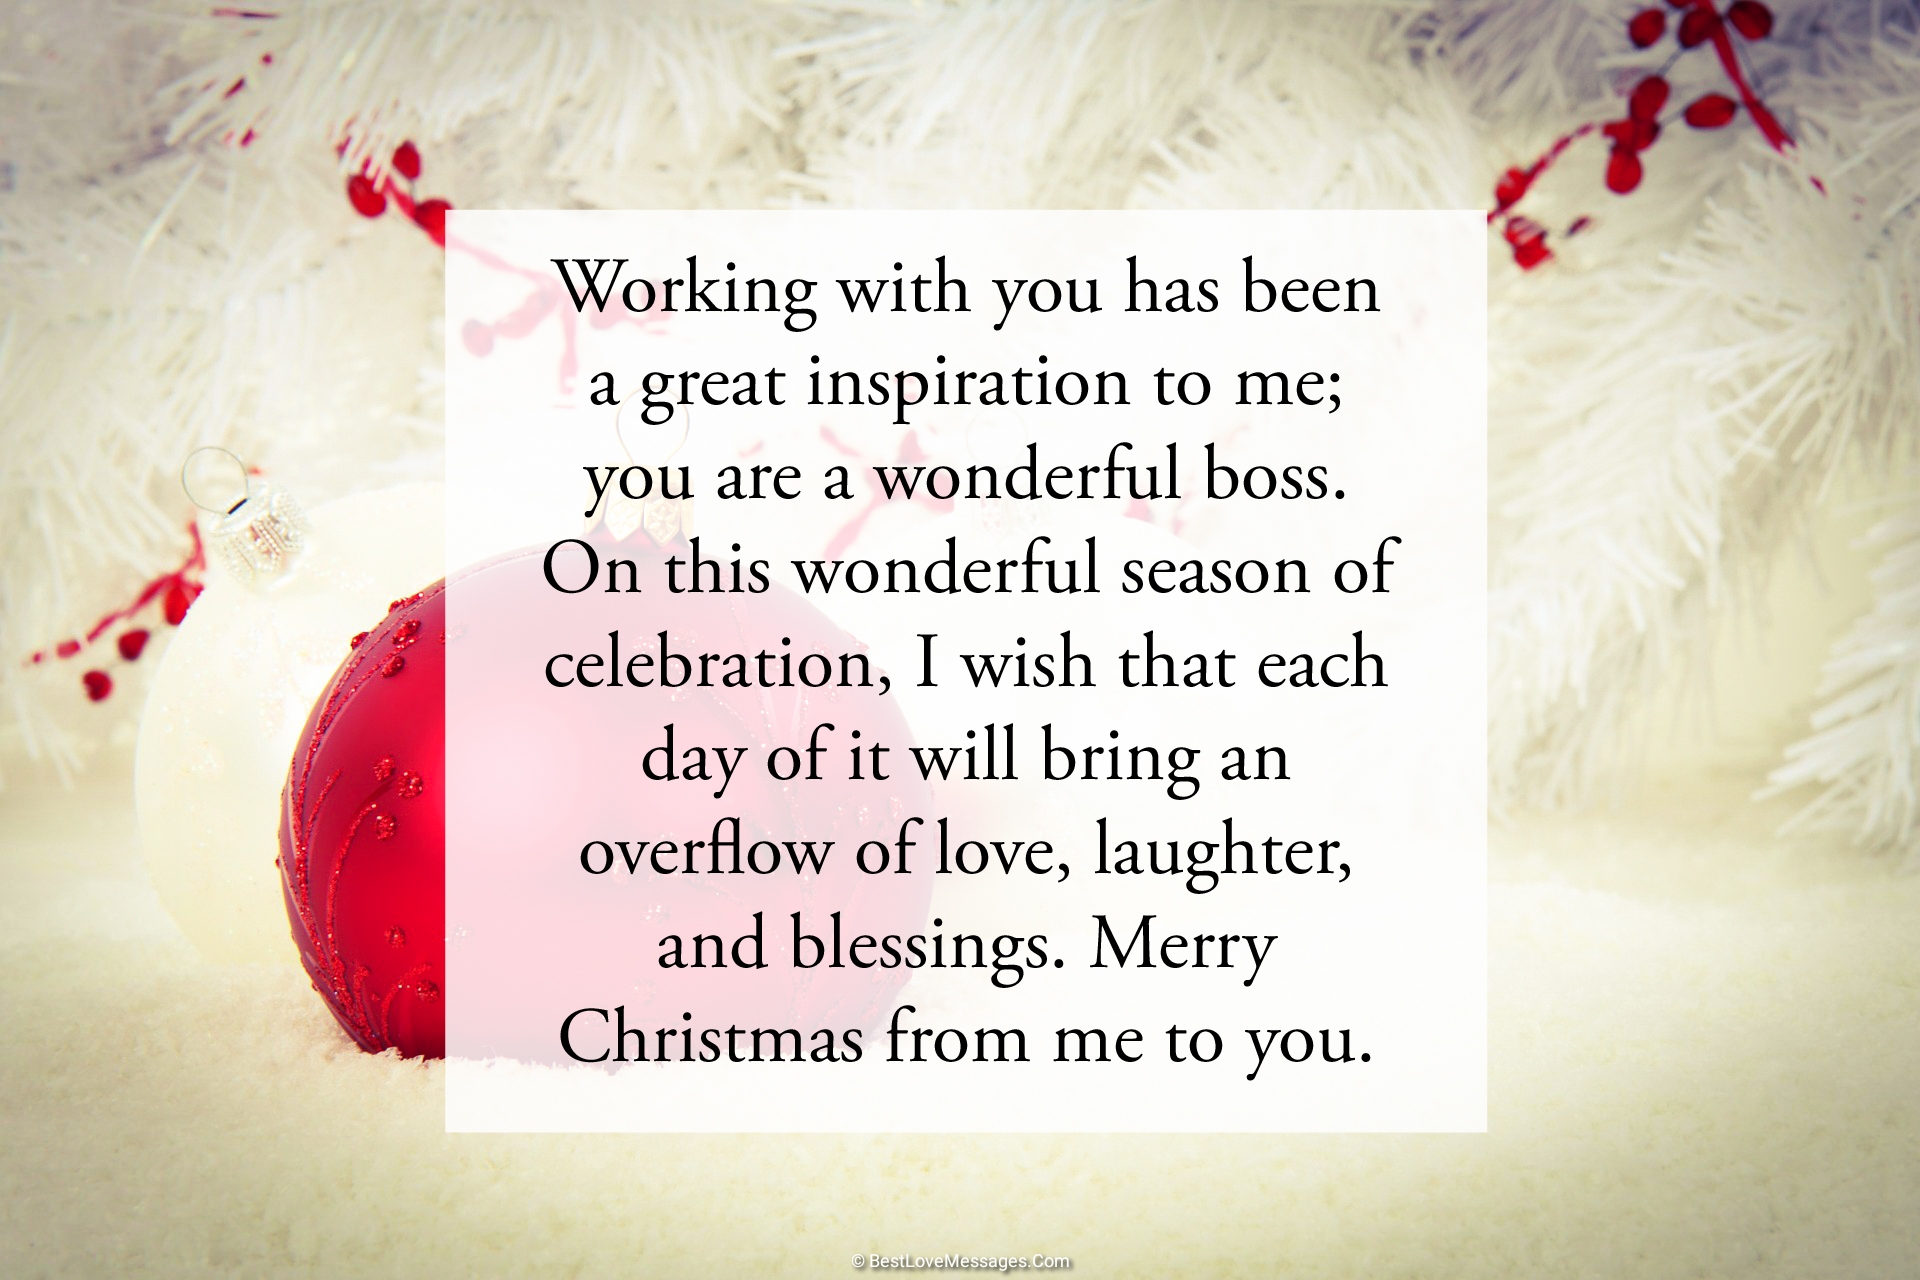 Merry Christmas Wishes For Boss